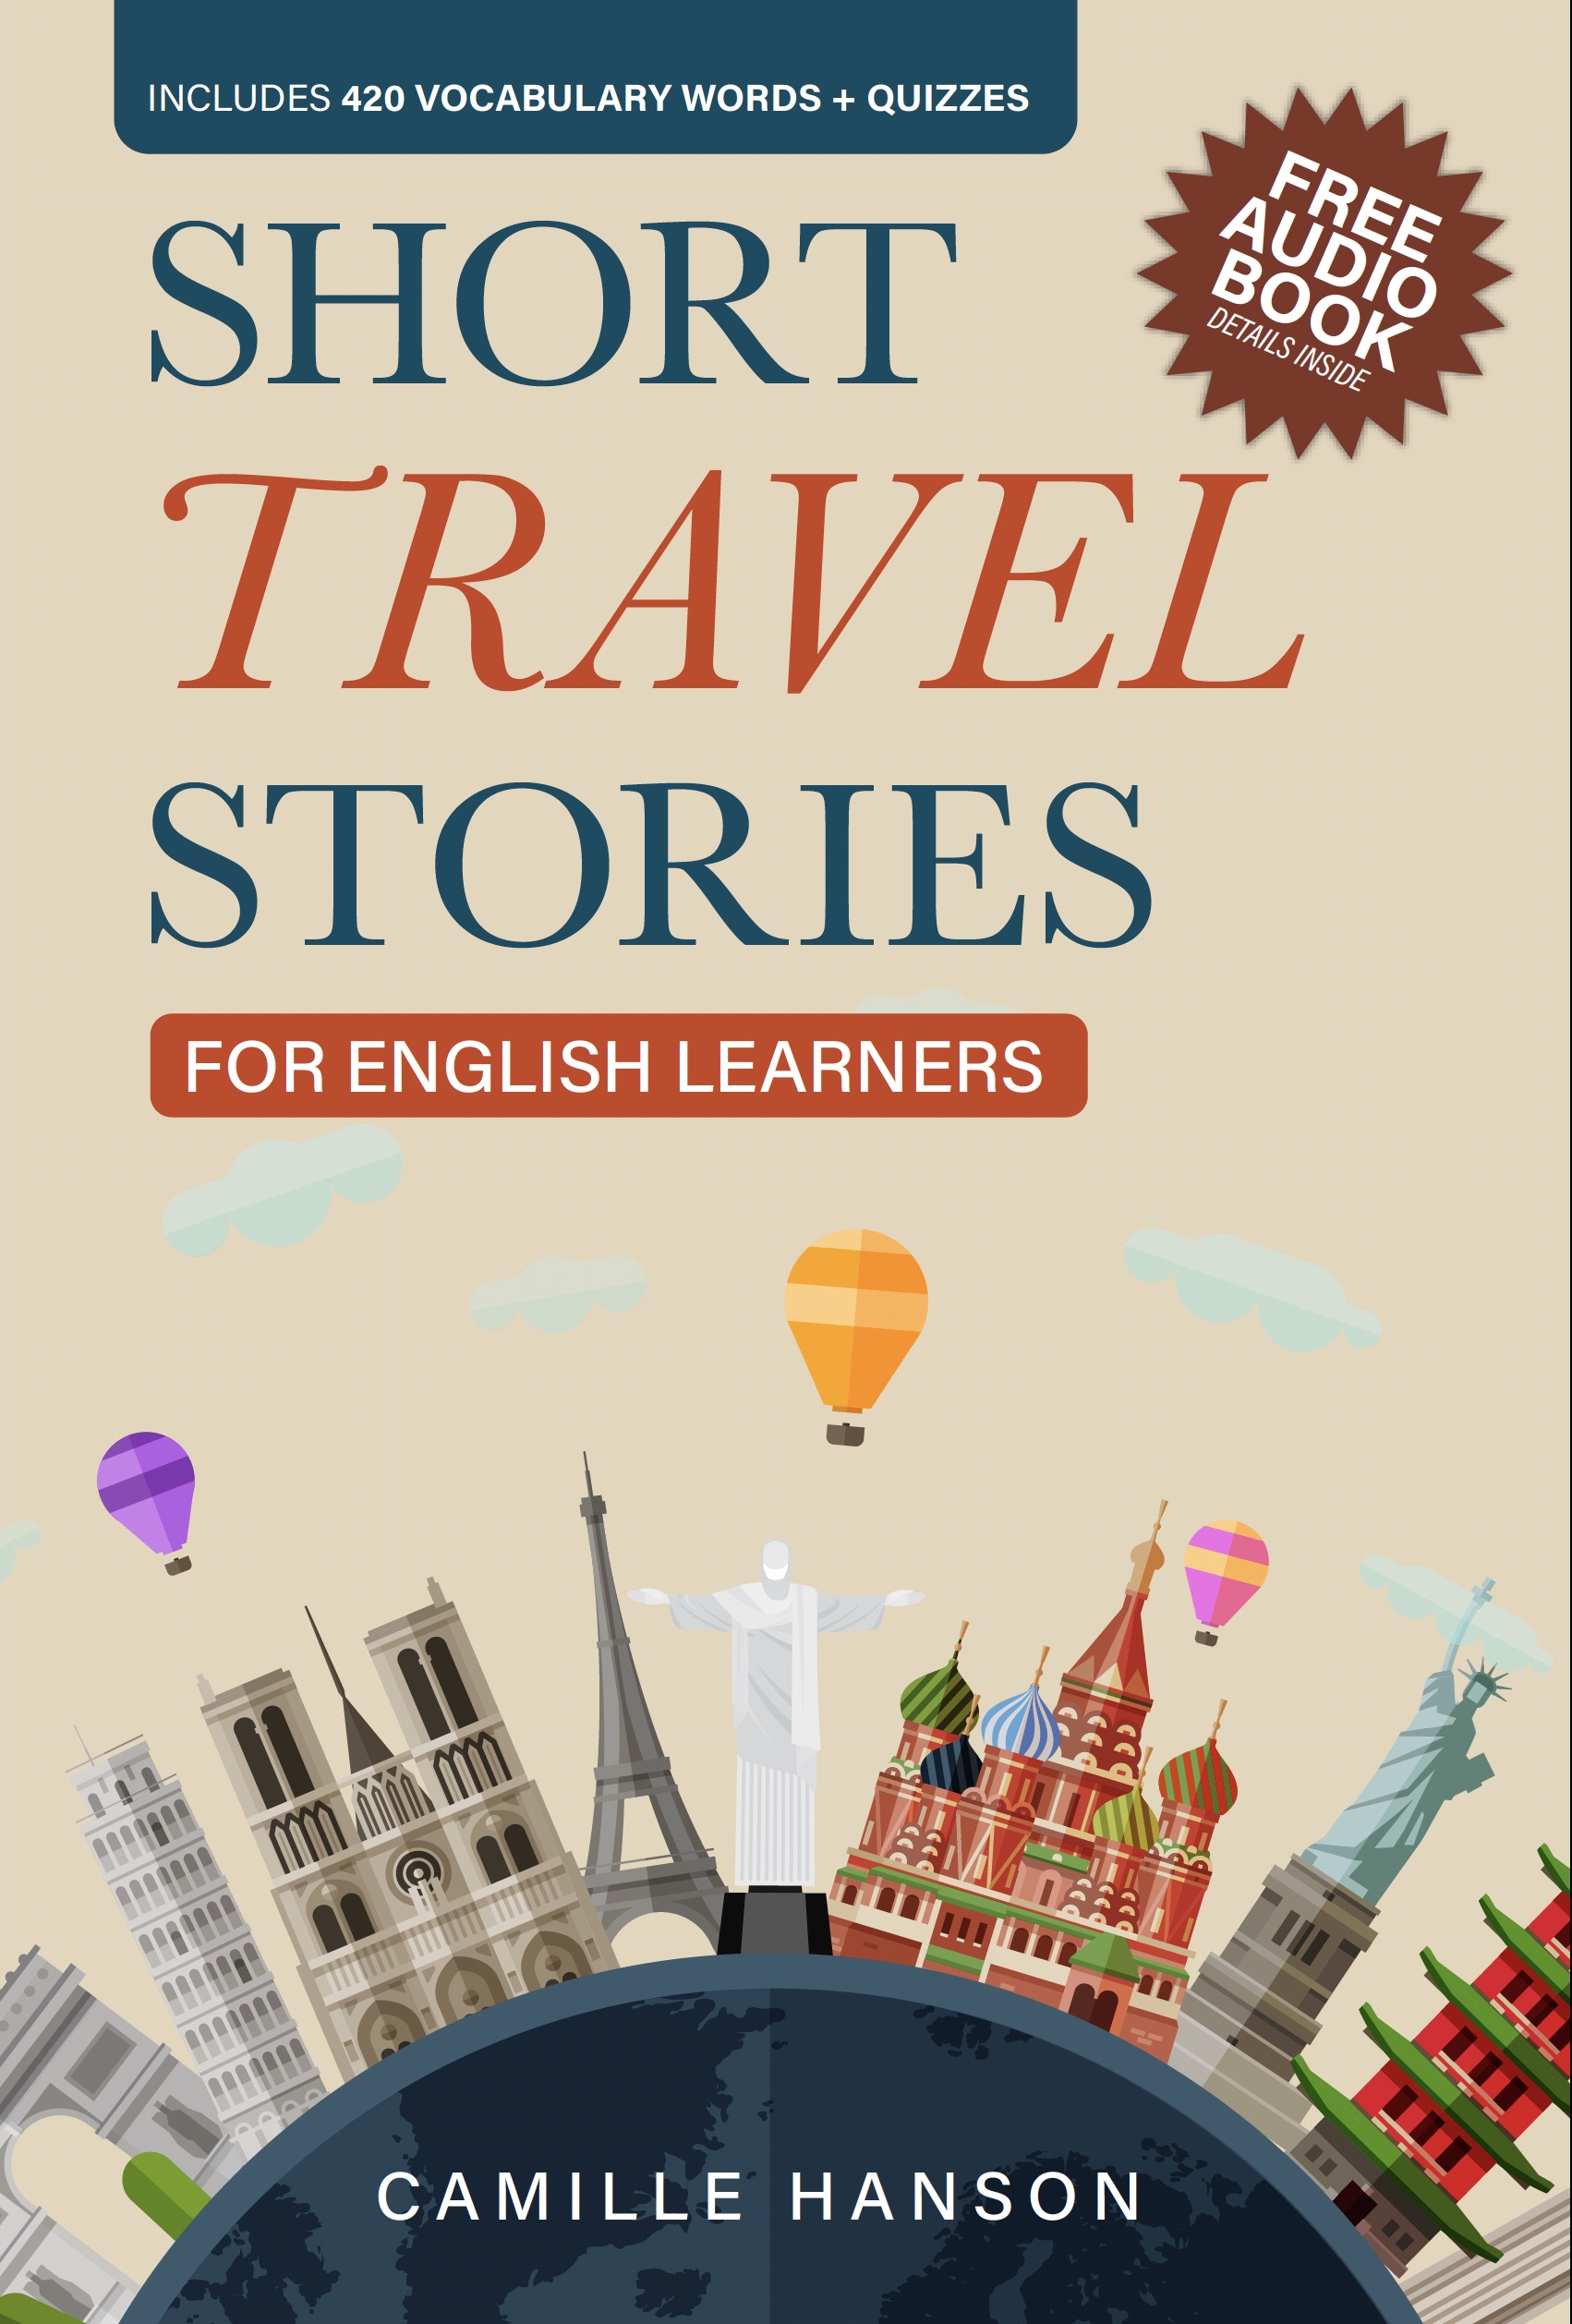 Short Travel Stories for English Learners: Learn English with 26 True Stories With Keywords and Comprehension Quizzes (Learn English with Short Travel Stories with Parallel Languages)